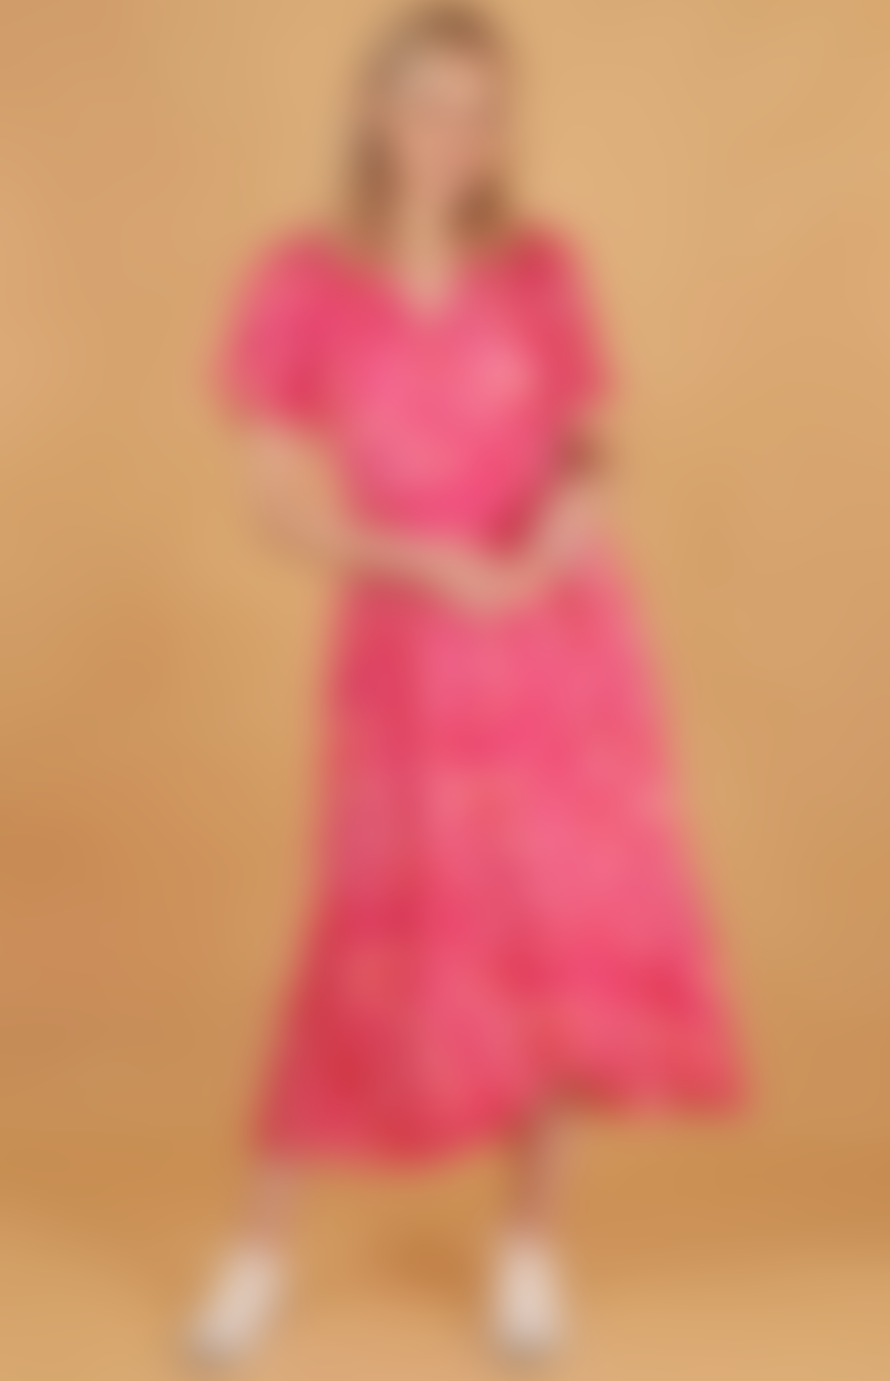 MSH Msh Abstract Print Short Sleeve Dipped Hem Maxi Wrap Dress In Pink